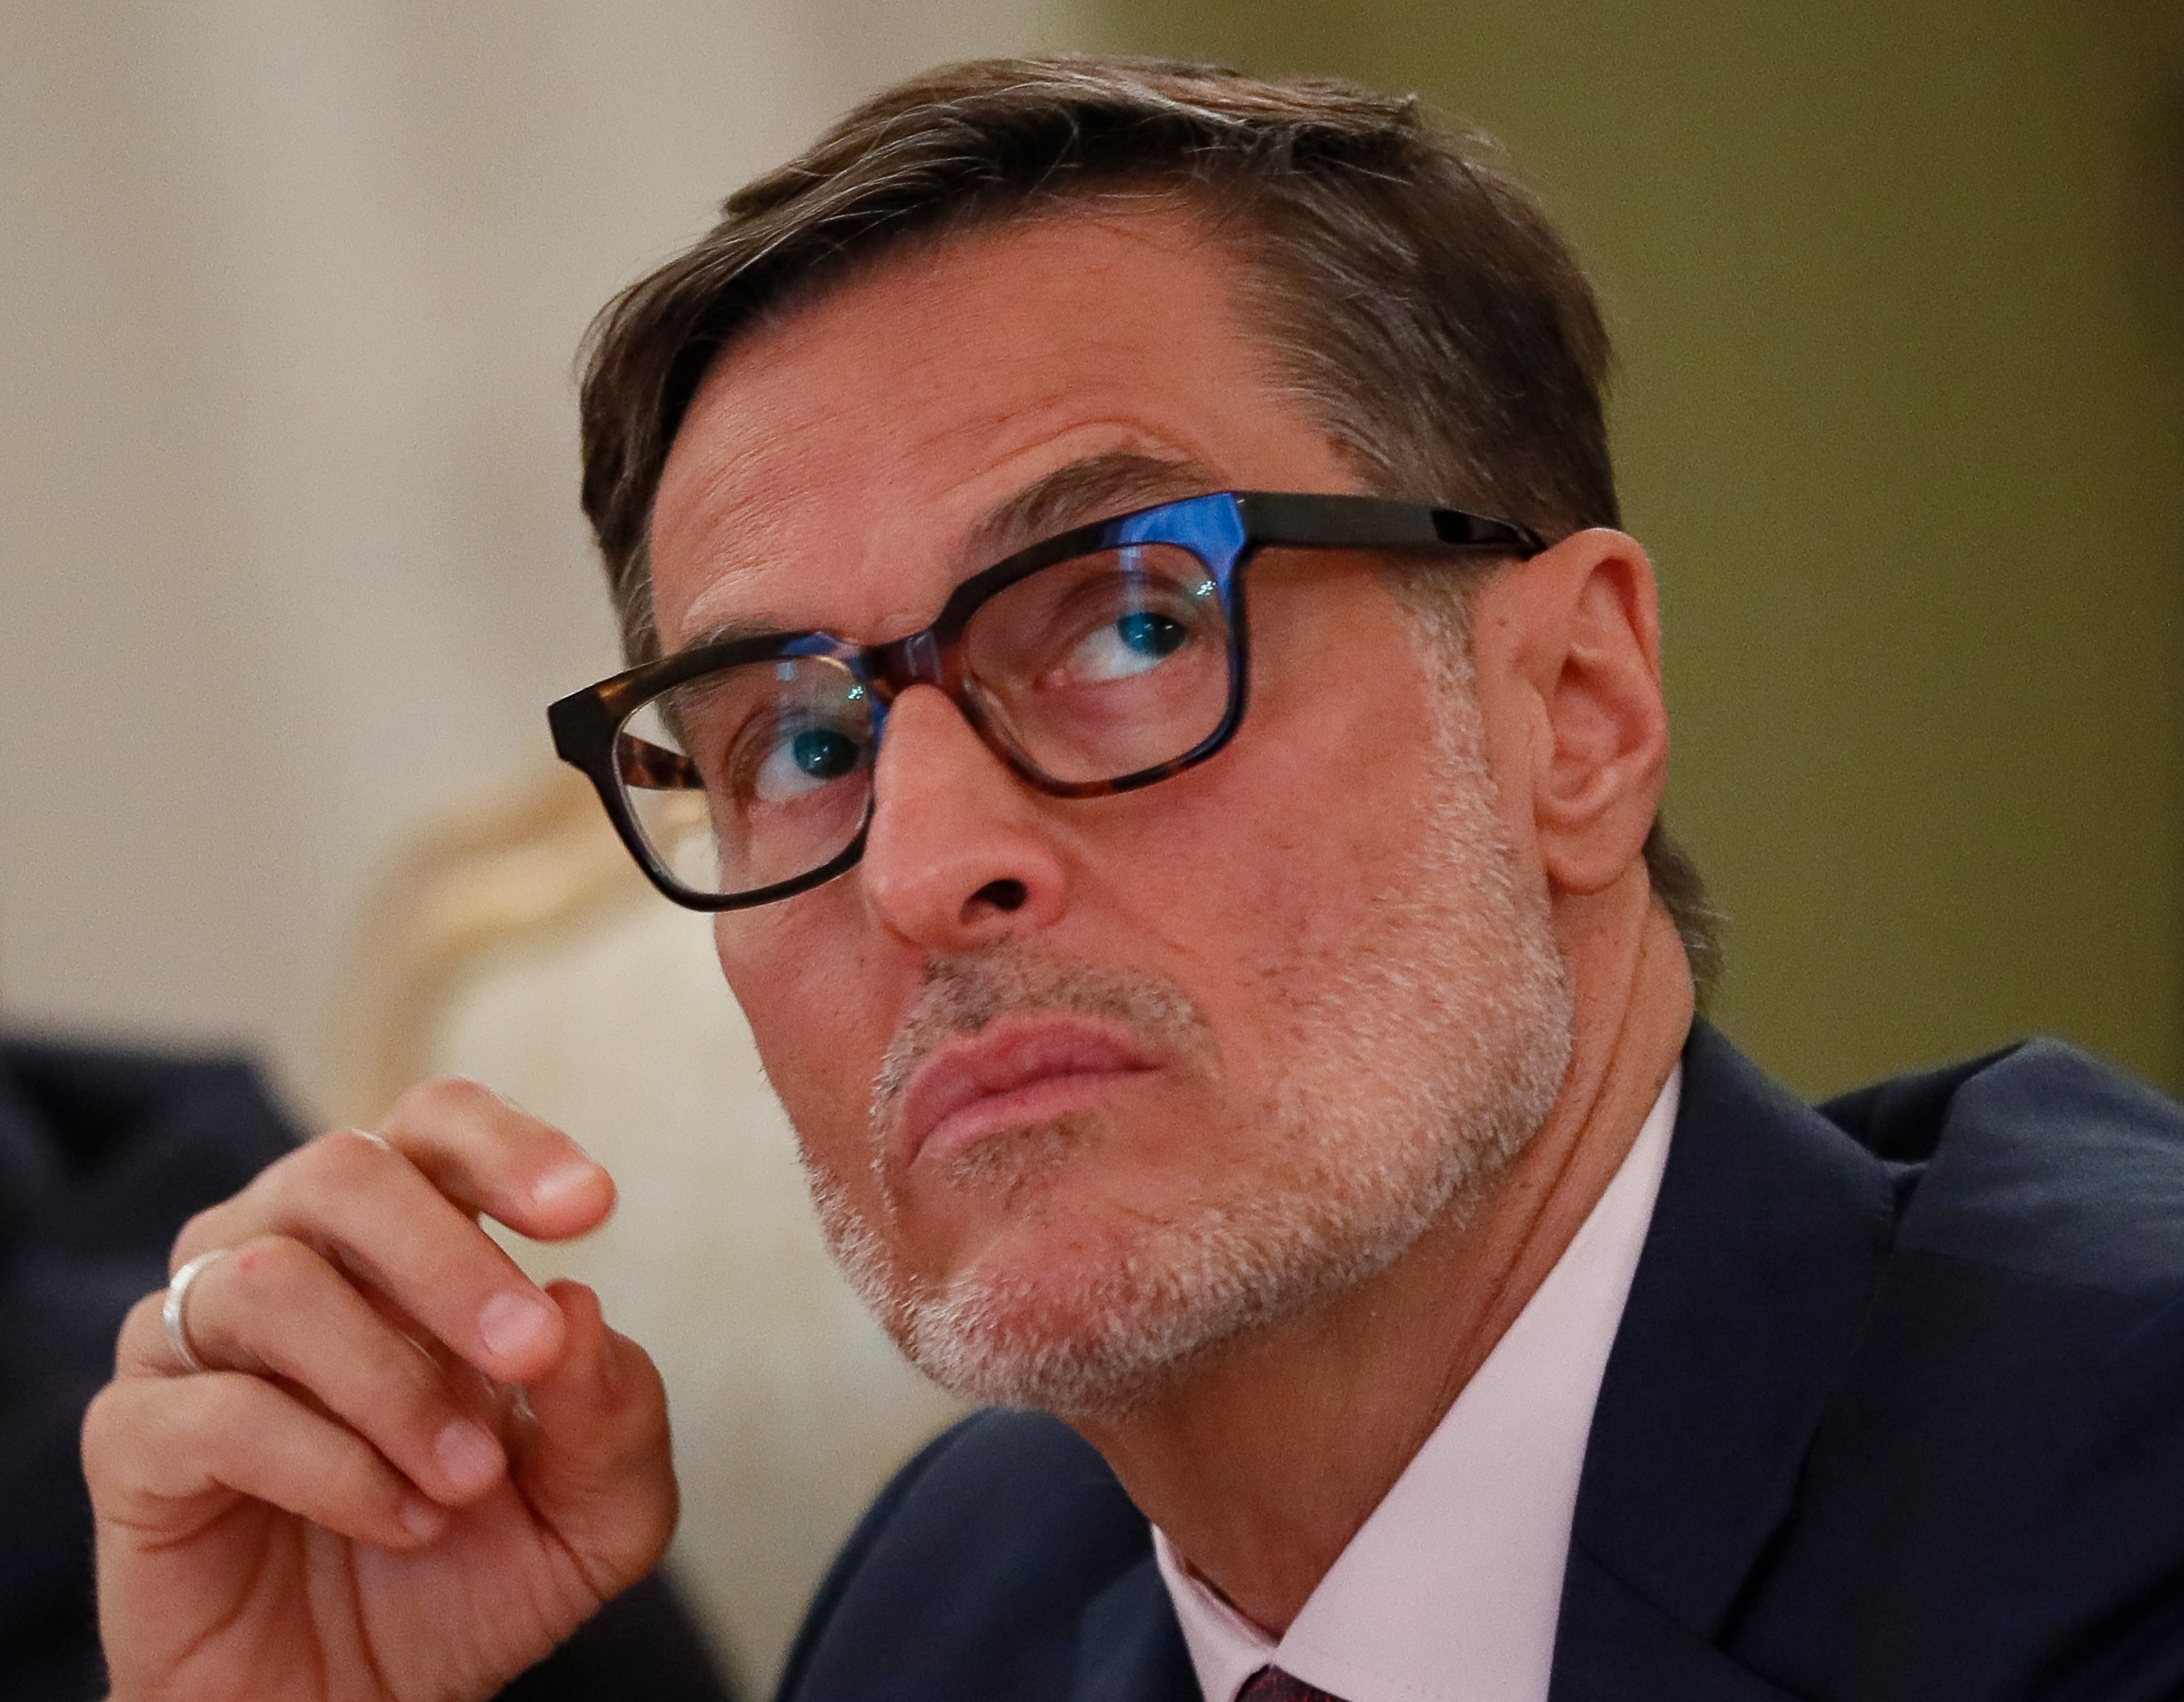 Félix Plasencia was foreign minister of the Venezuelan regime between August 2021 and May 2022 and ambassador to China between 2019 and 2021